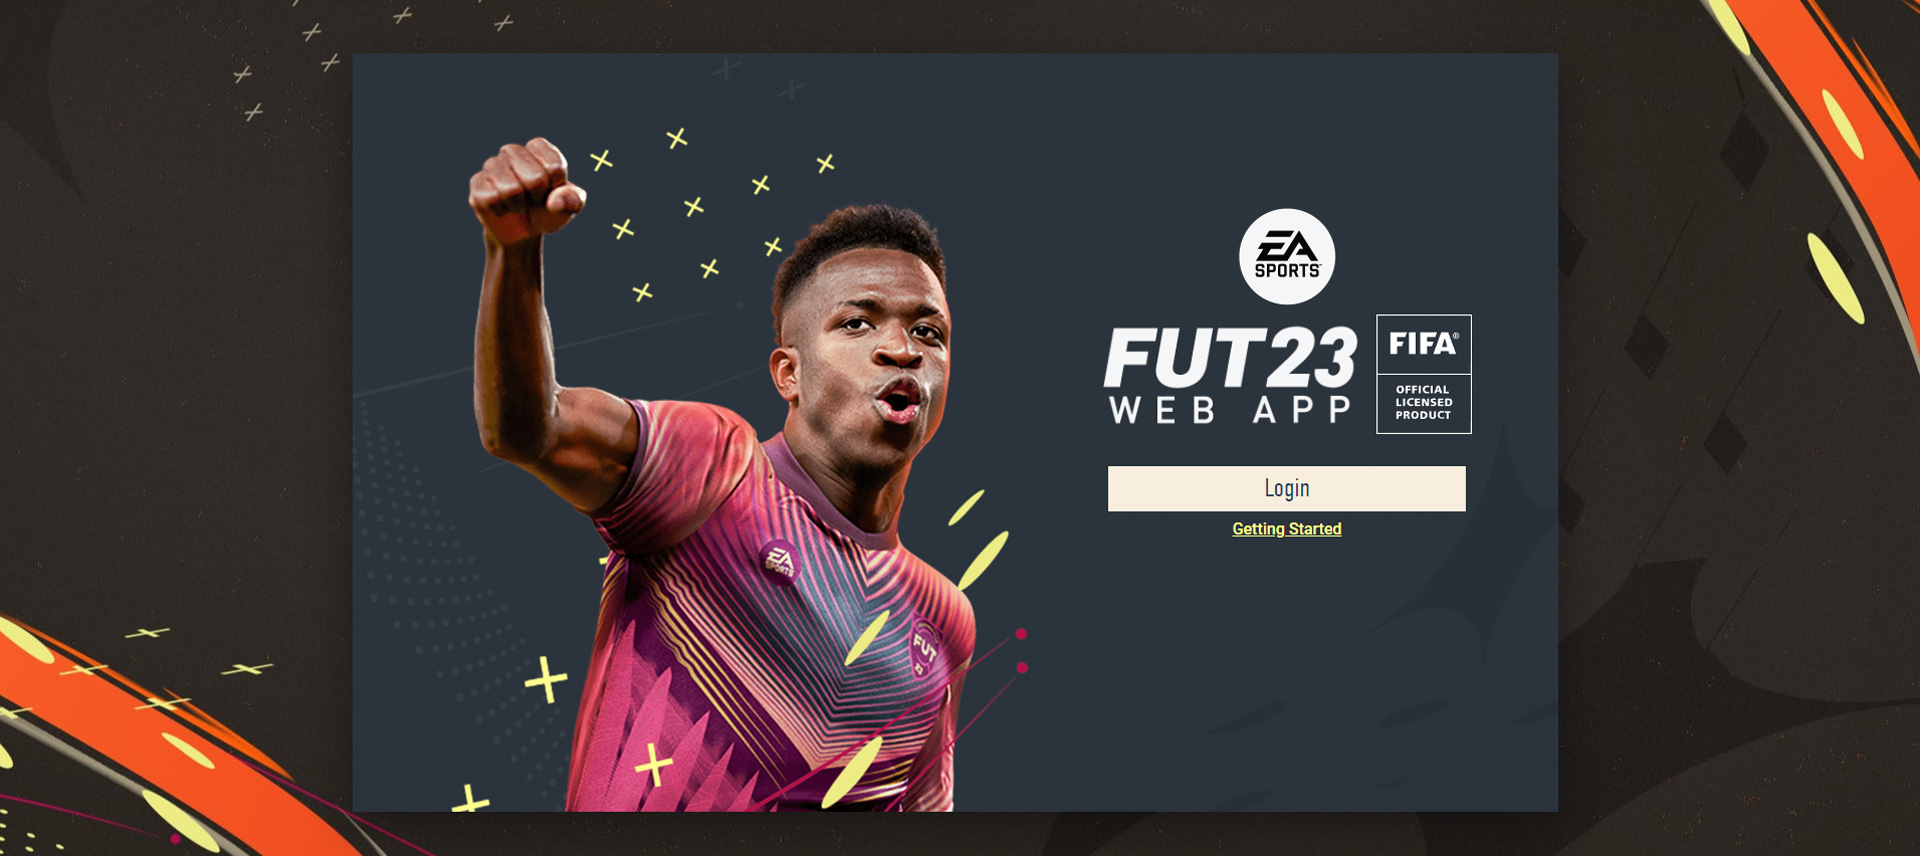 How to buy FIFA points on web app?